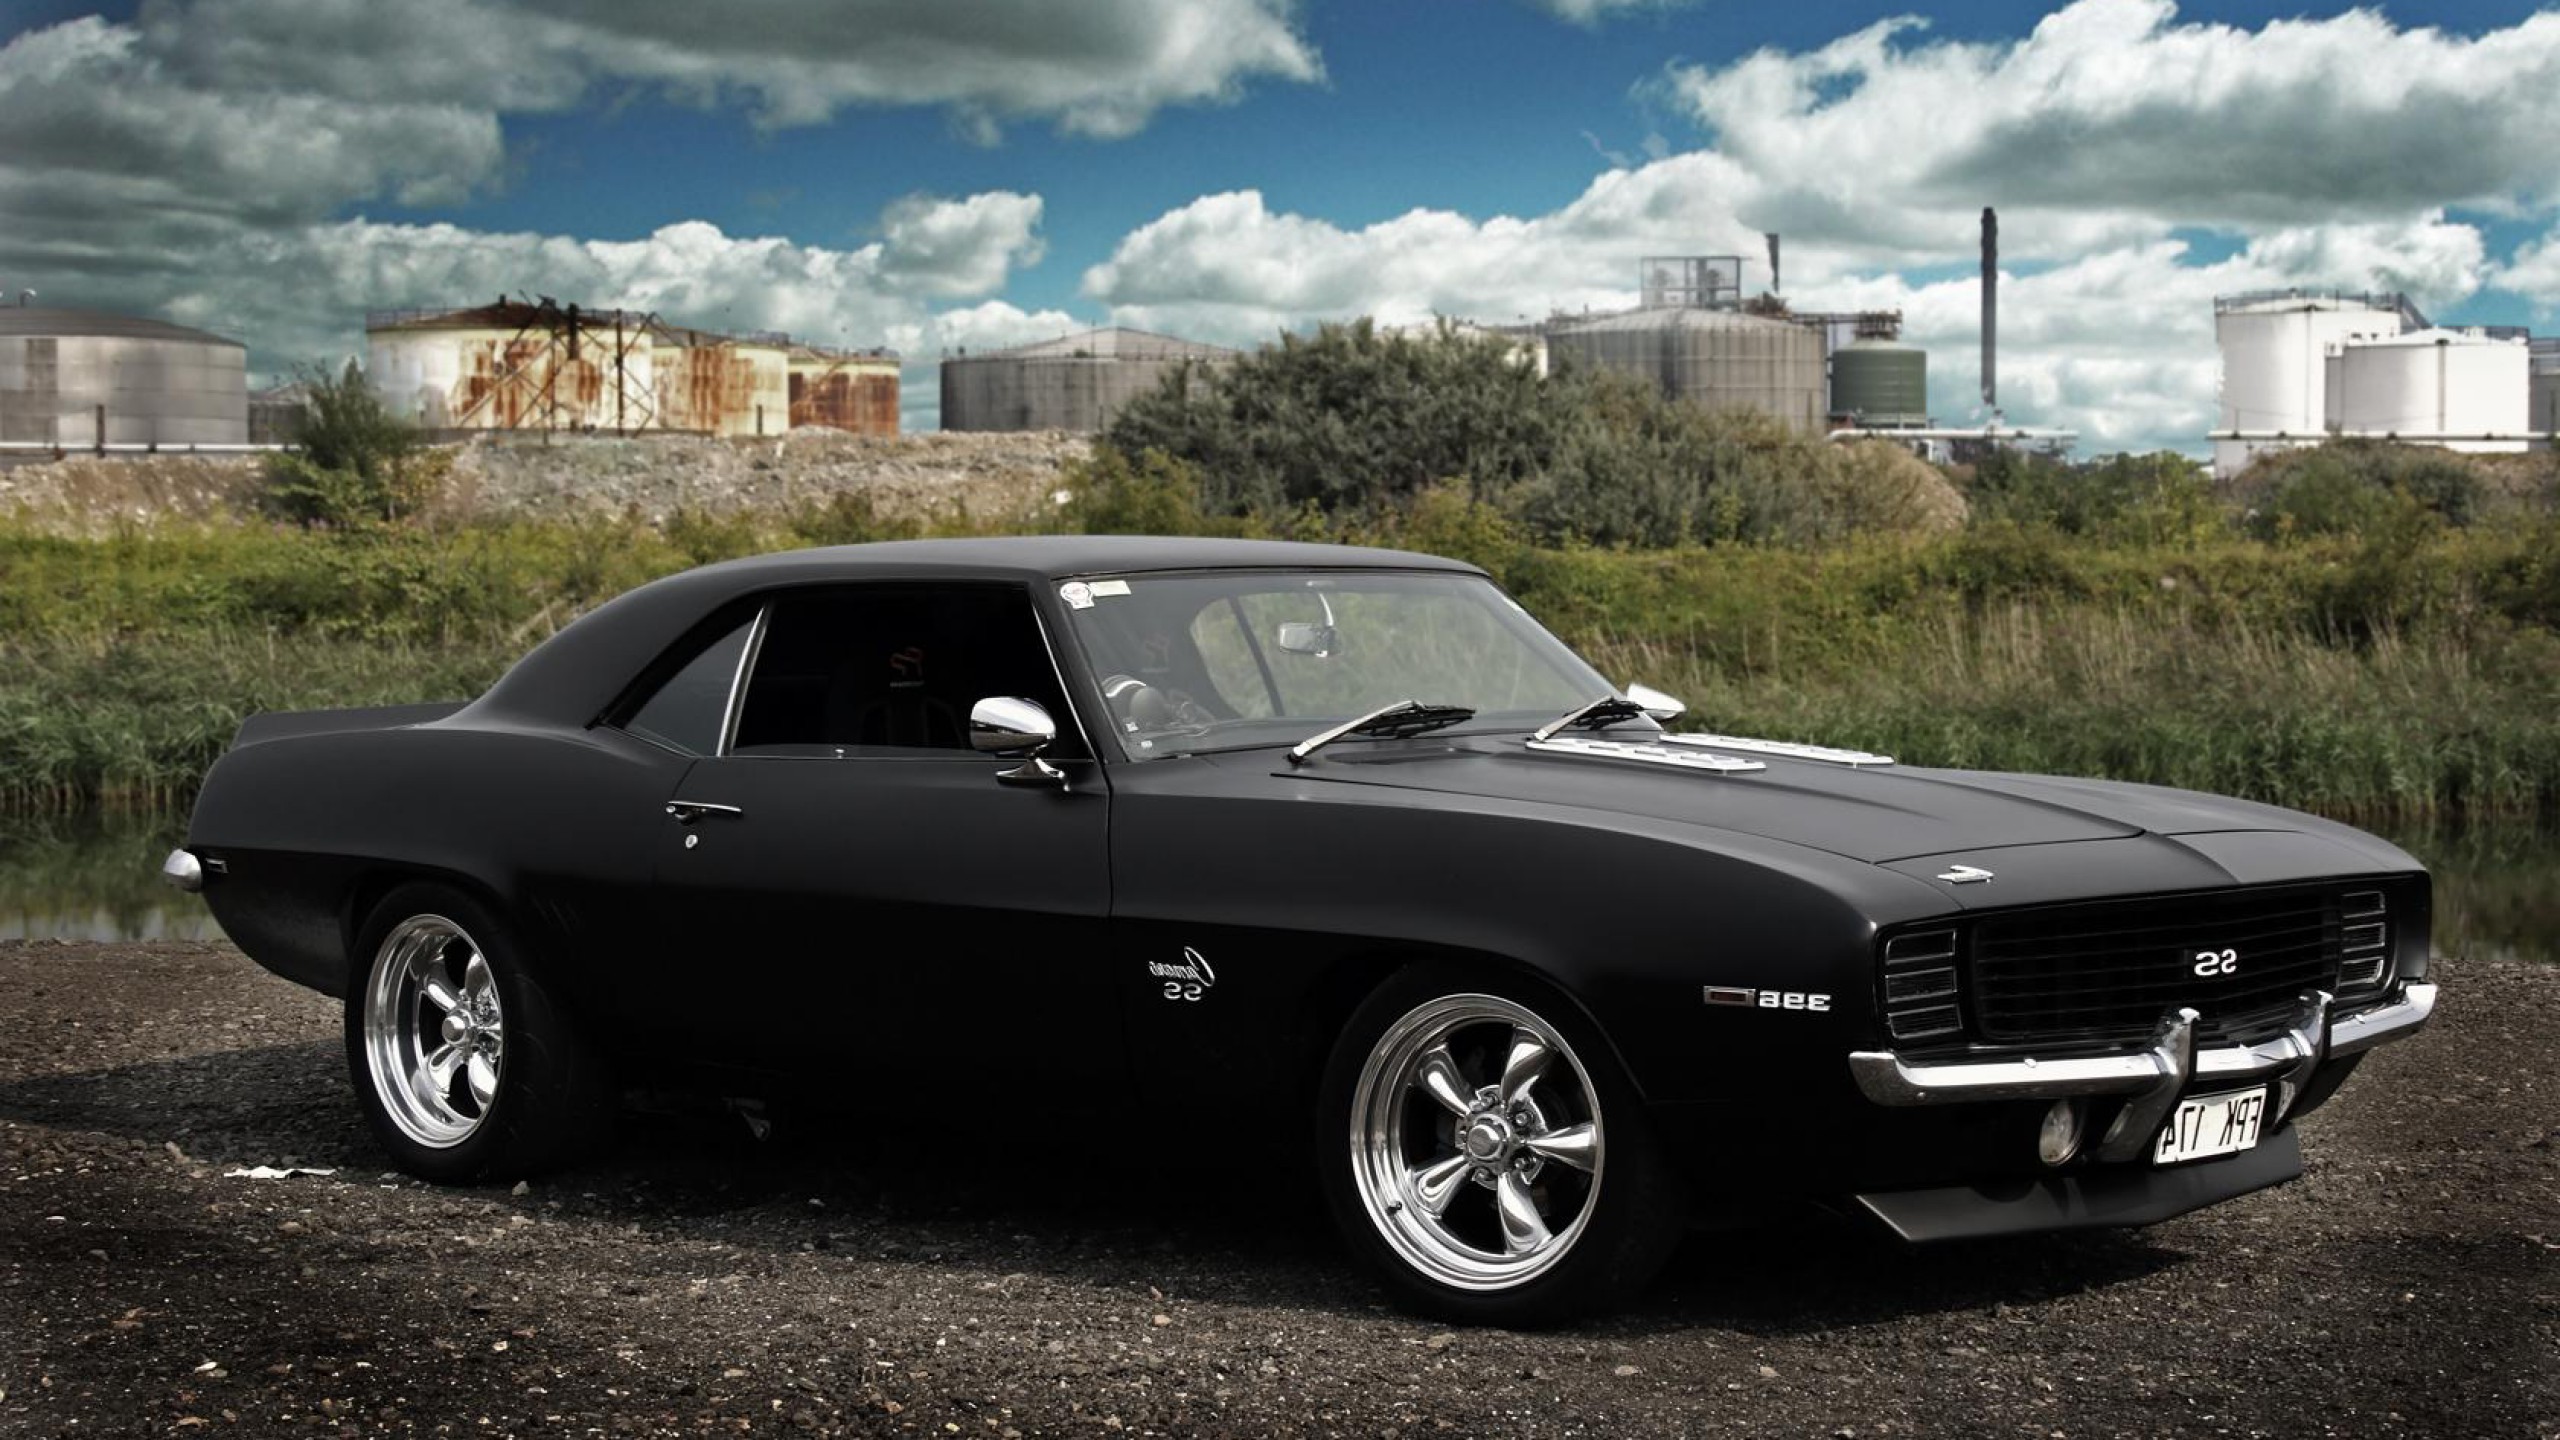 Muscle Car #5